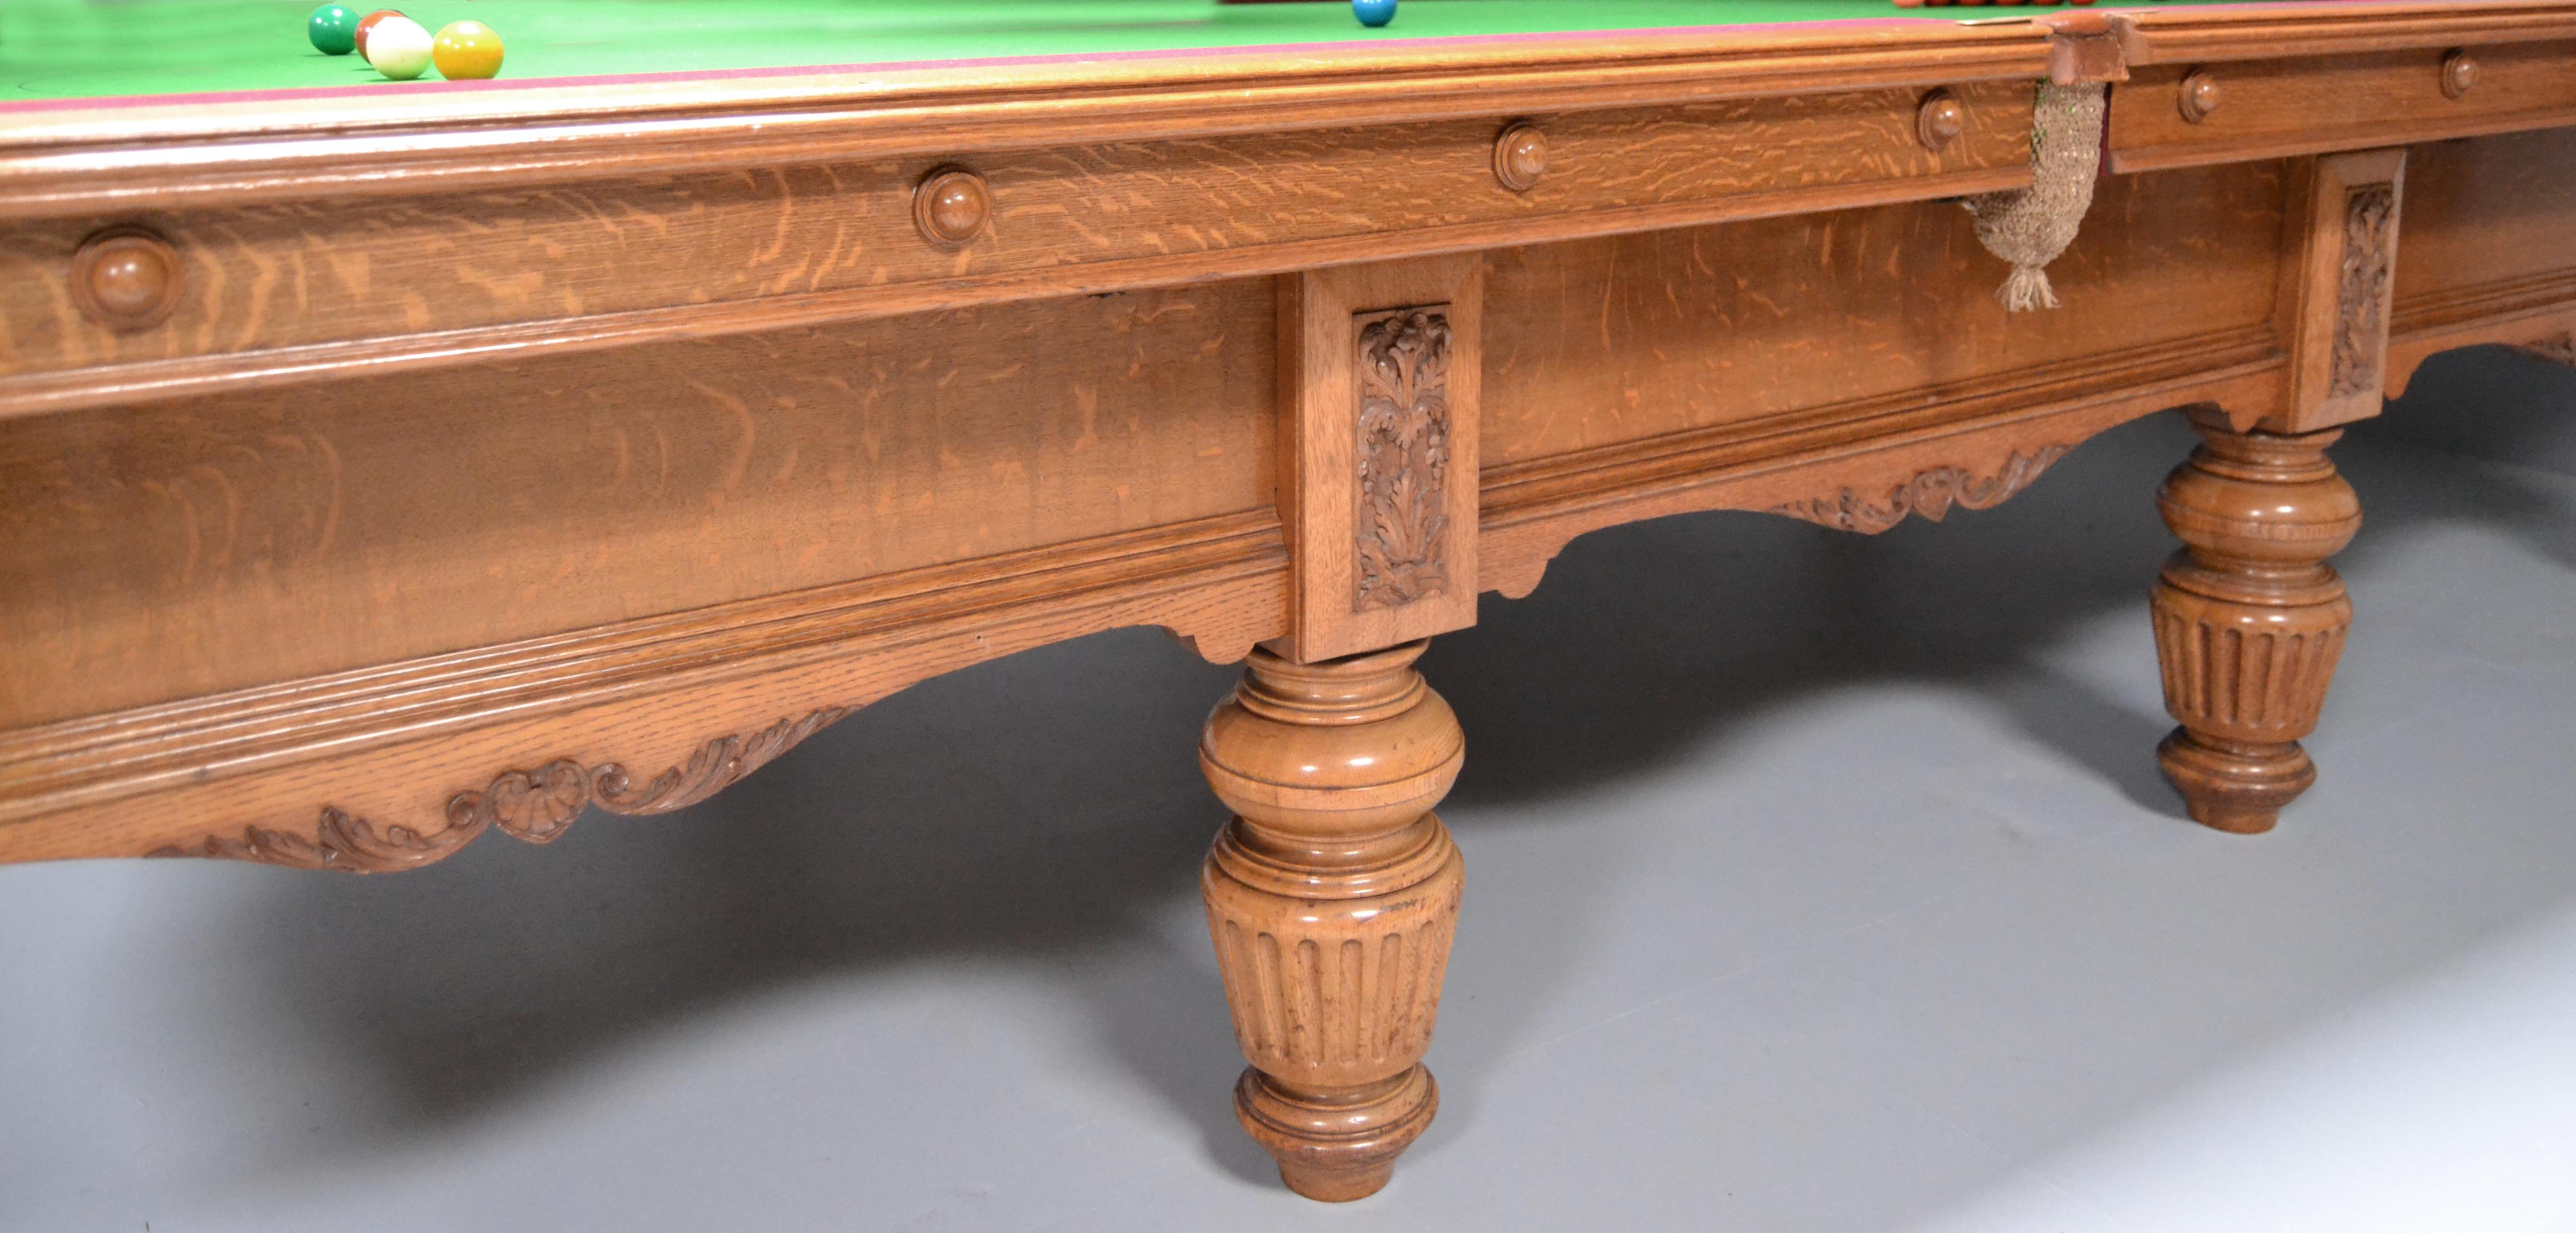 This is a great example of an English country house full size billiard or snooker table made circa 1890 by the renowned London manufacturer George Wright. 

Standing on eight sturdy reeded legs with attractive rectangular panels and decorative